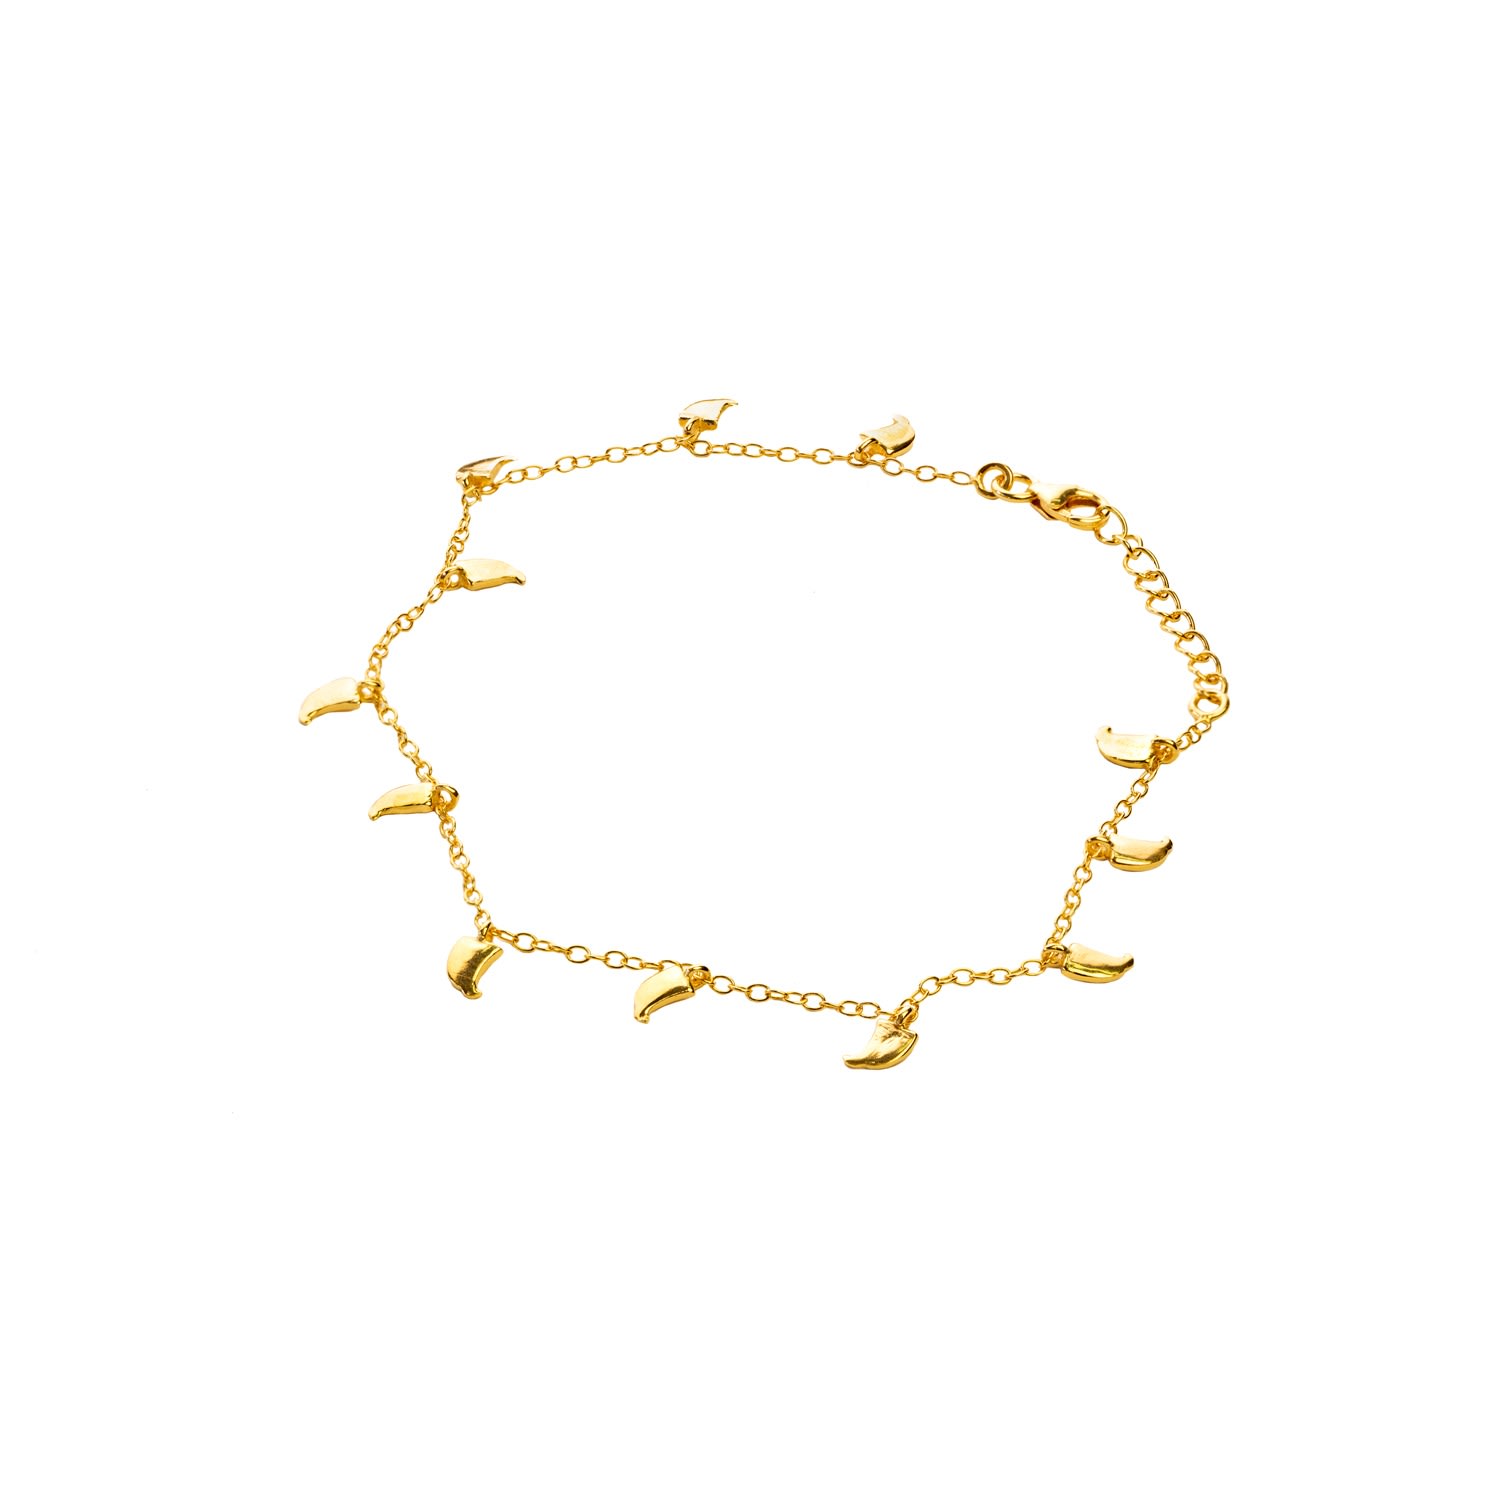 Women’s Wild Tiger Claw Anklet - Gold Vermeil Rize